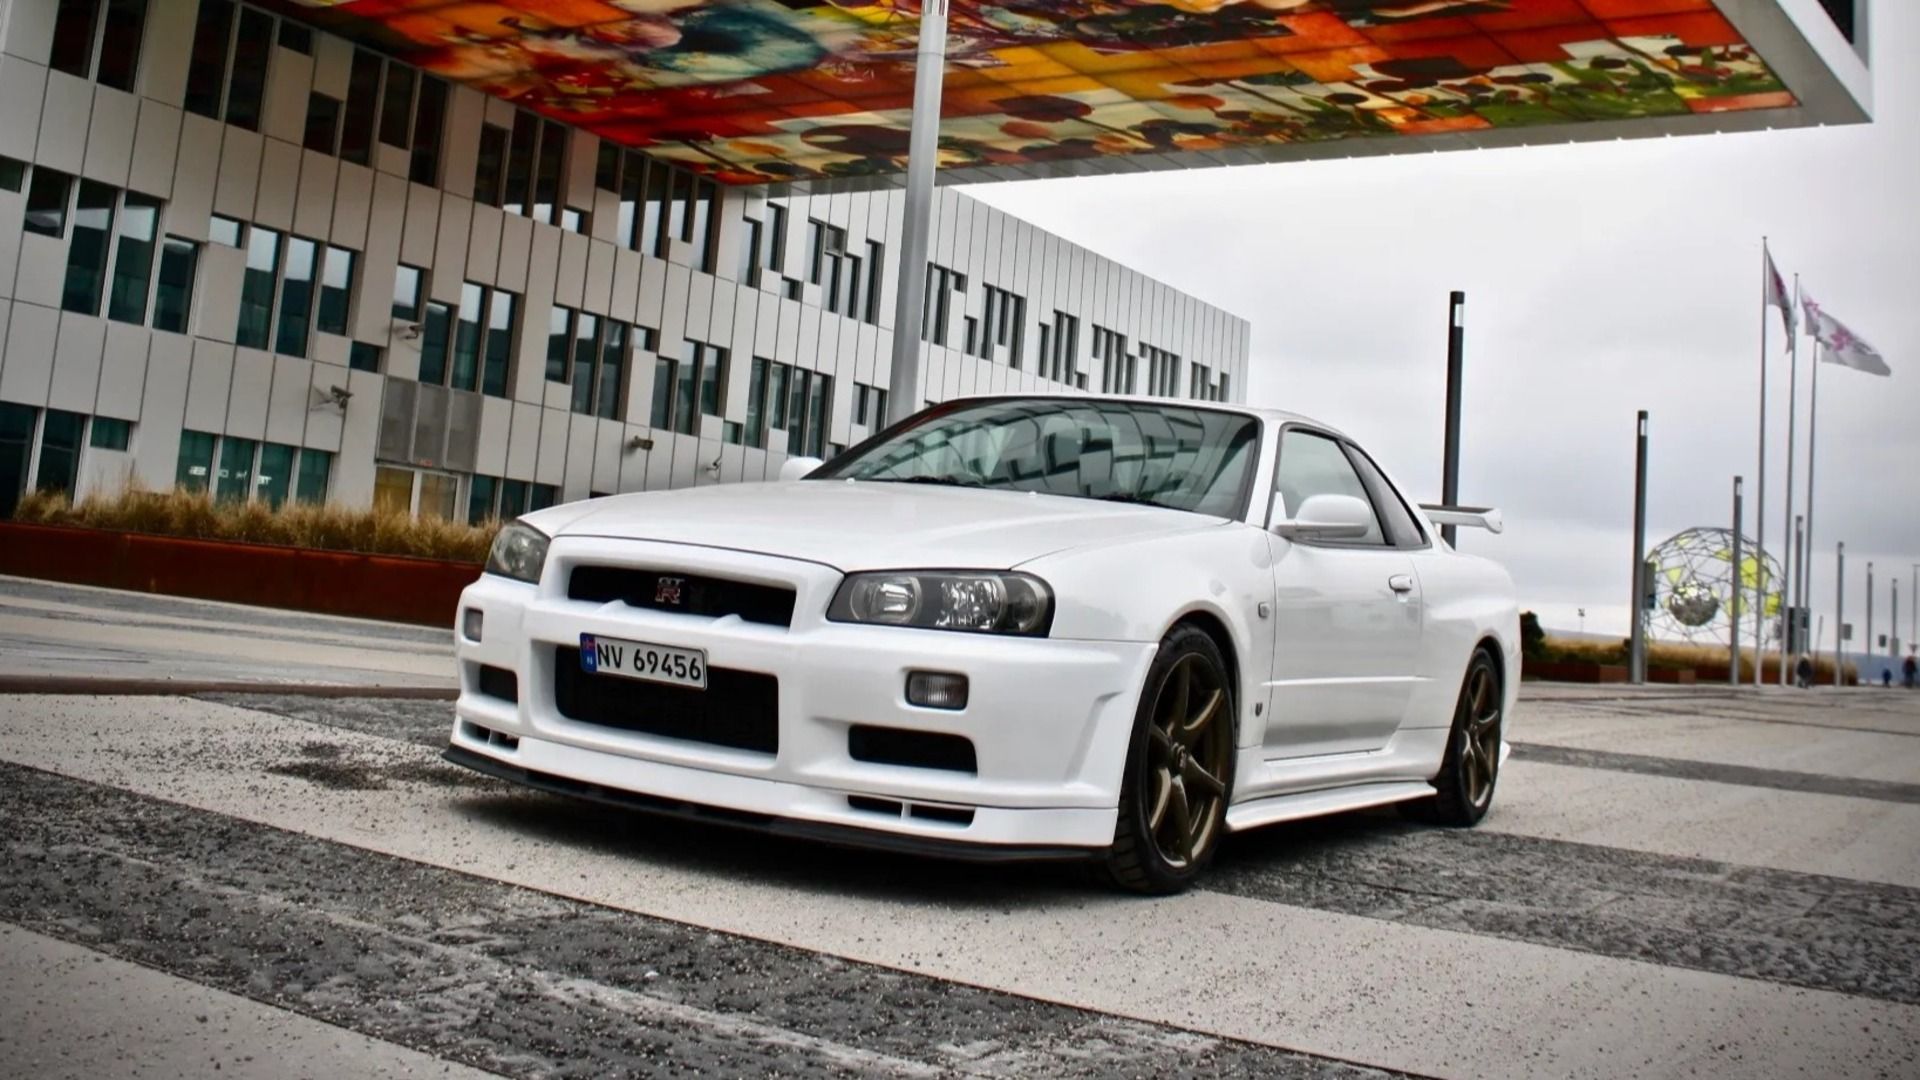 A white 1999 Nissan R34 Skyline GT-R parked on a cloudy day.